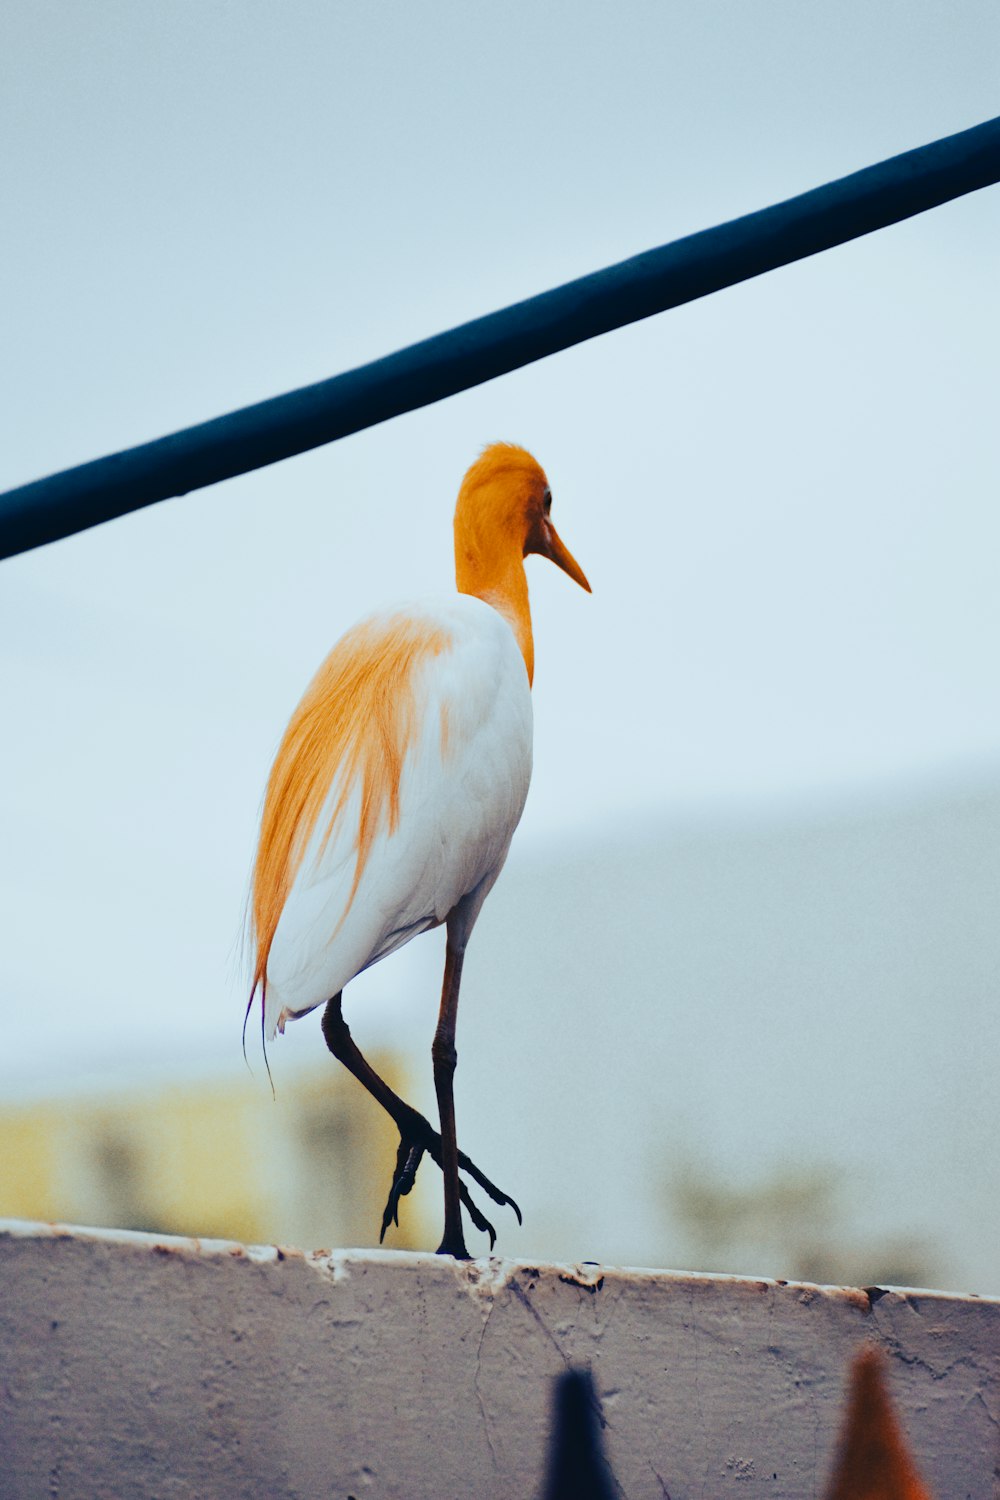 a white and orange bird standing on a ledge